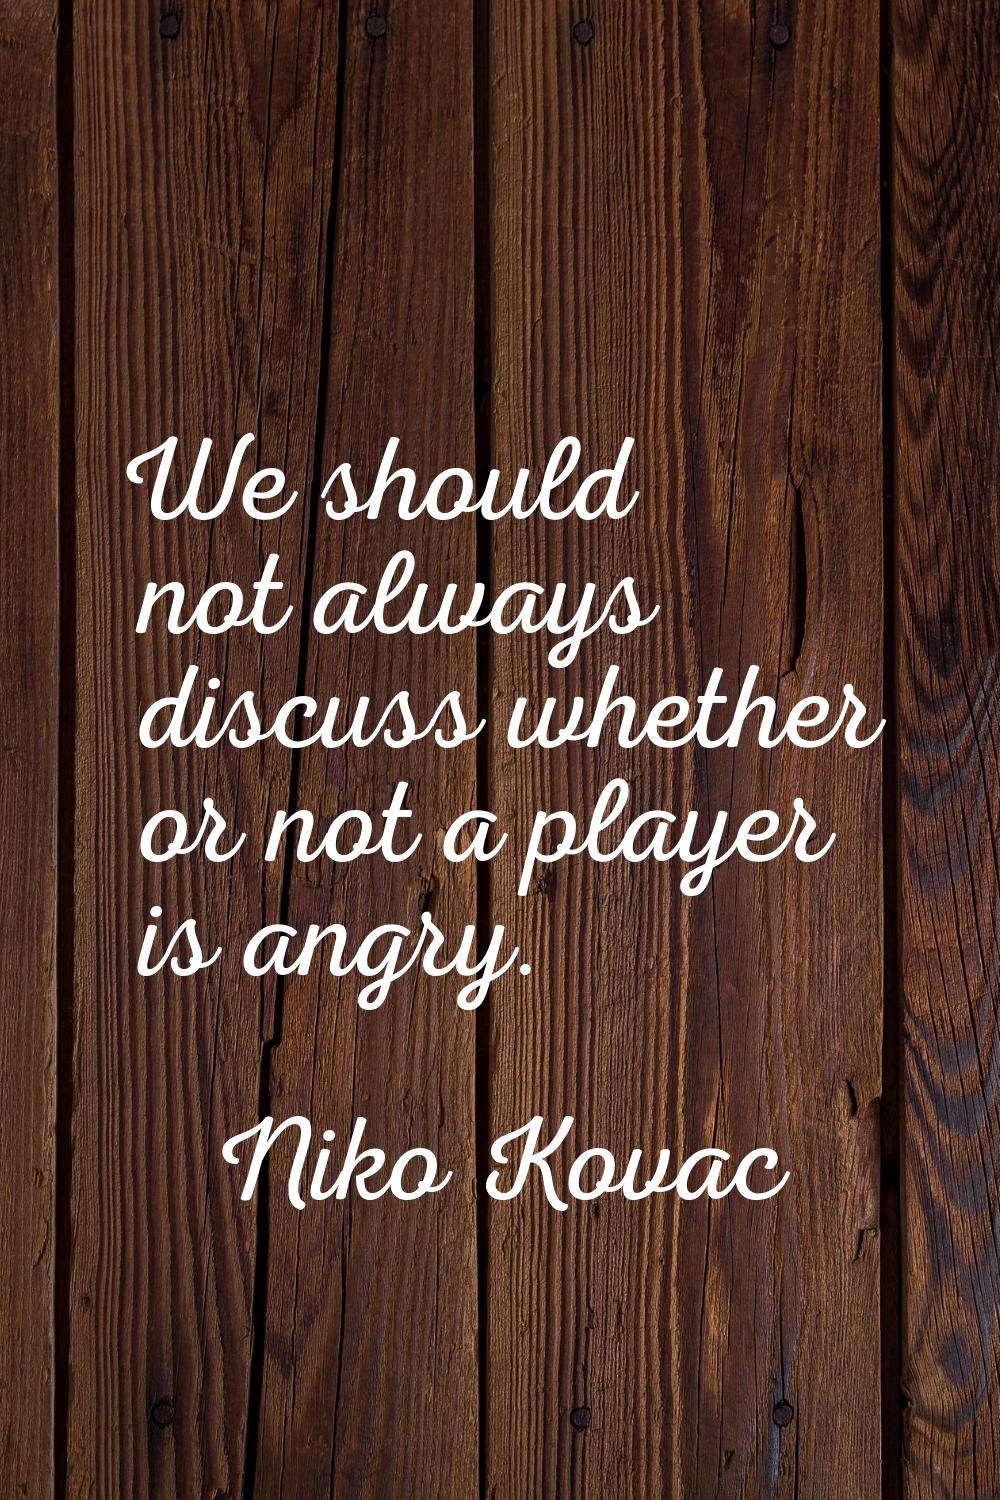 We should not always discuss whether or not a player is angry.